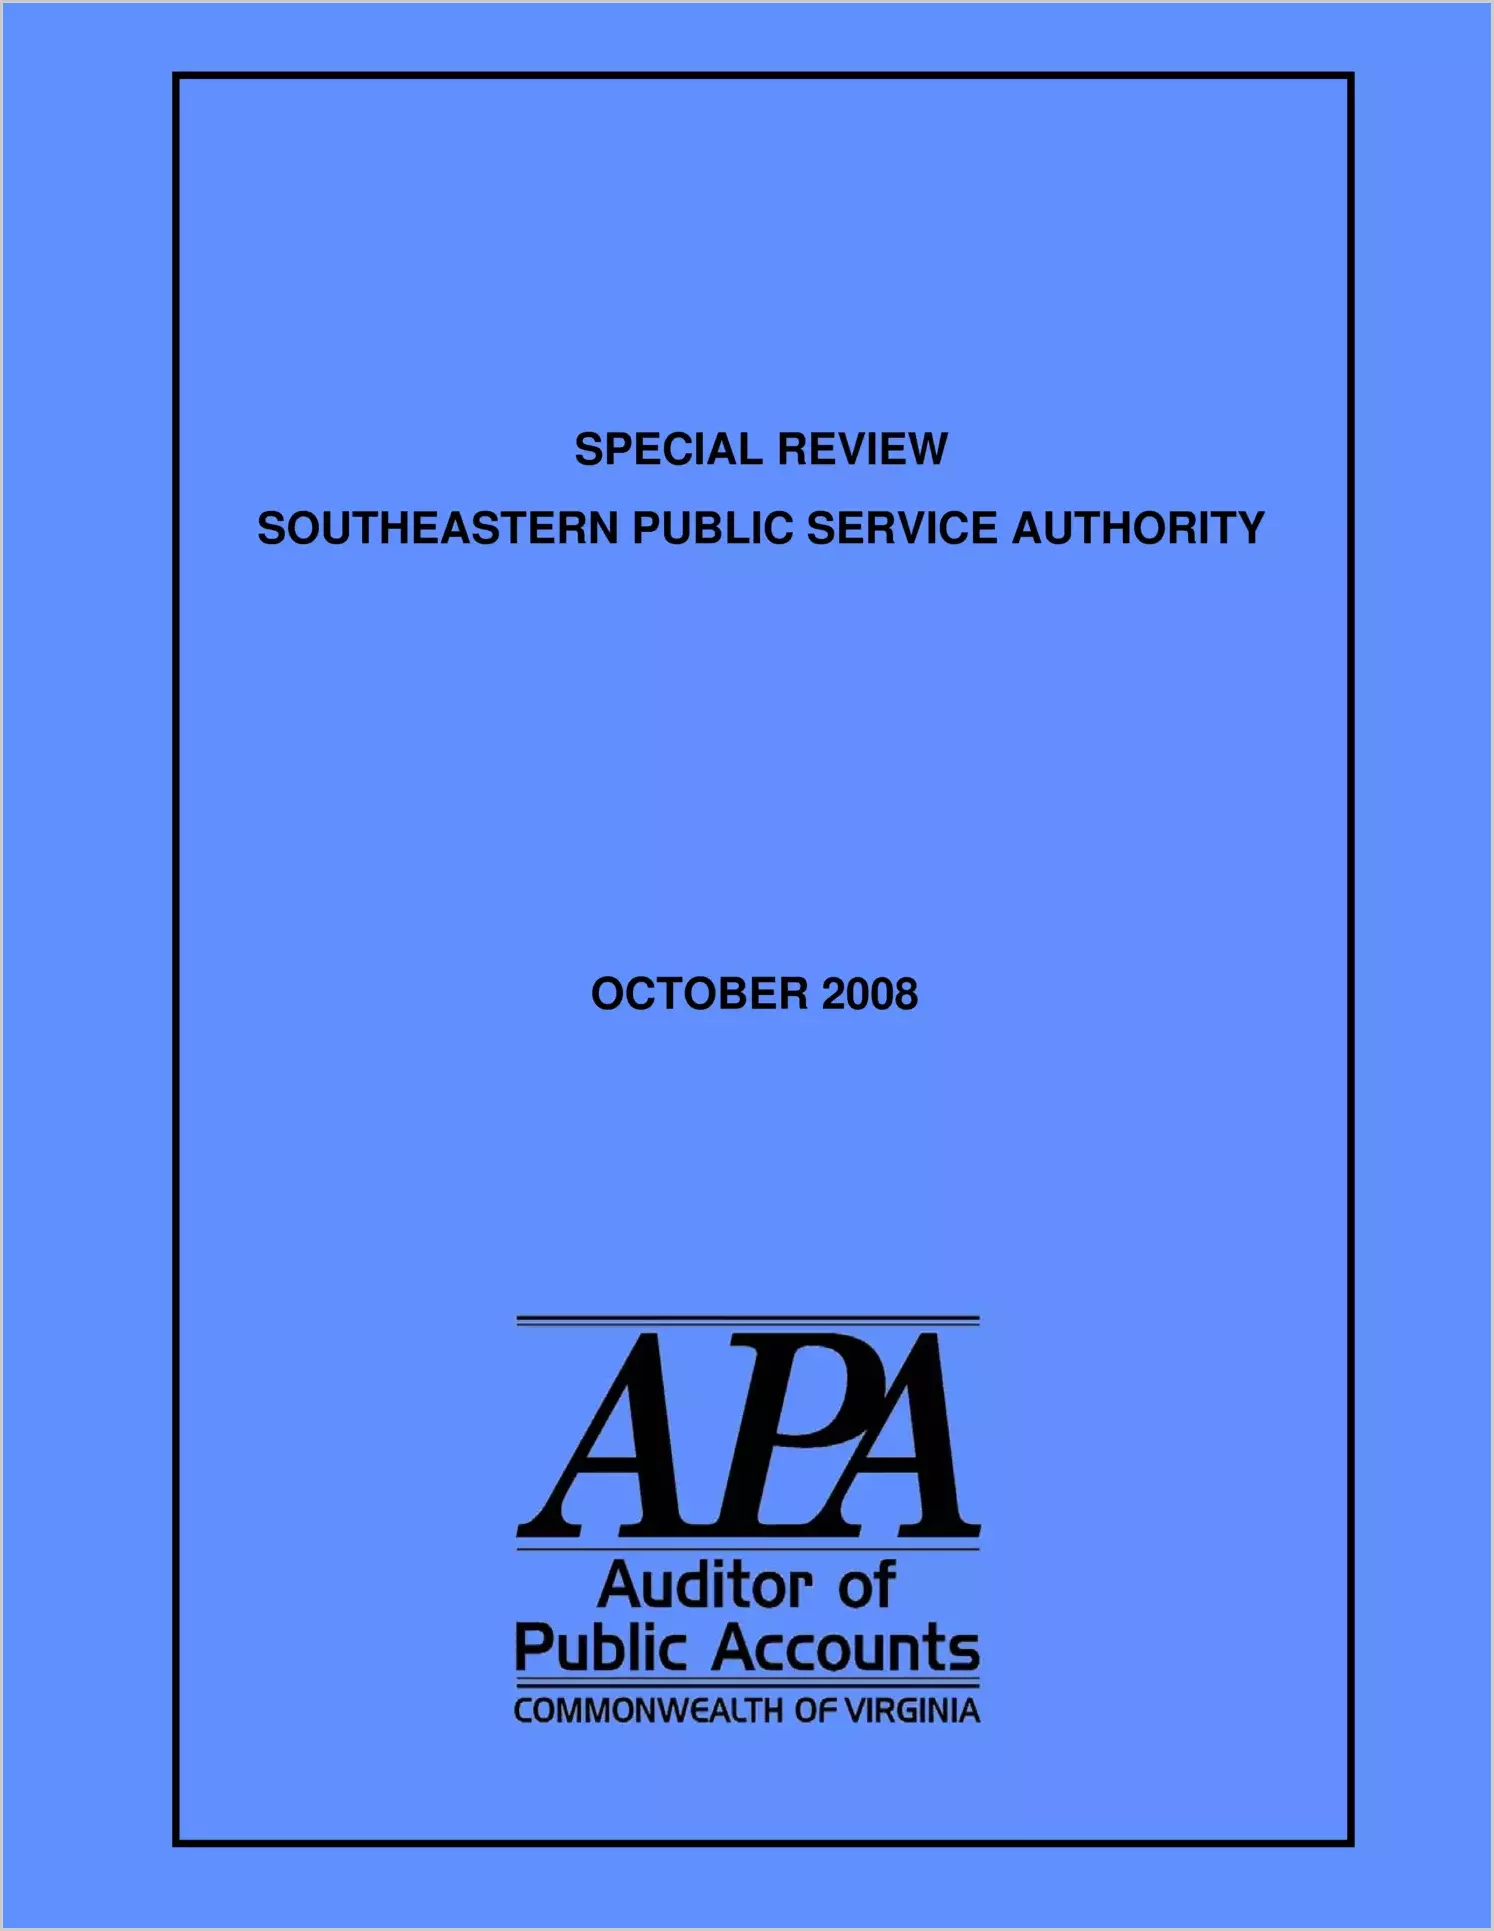 Southeastern Public Service Authority October 2008